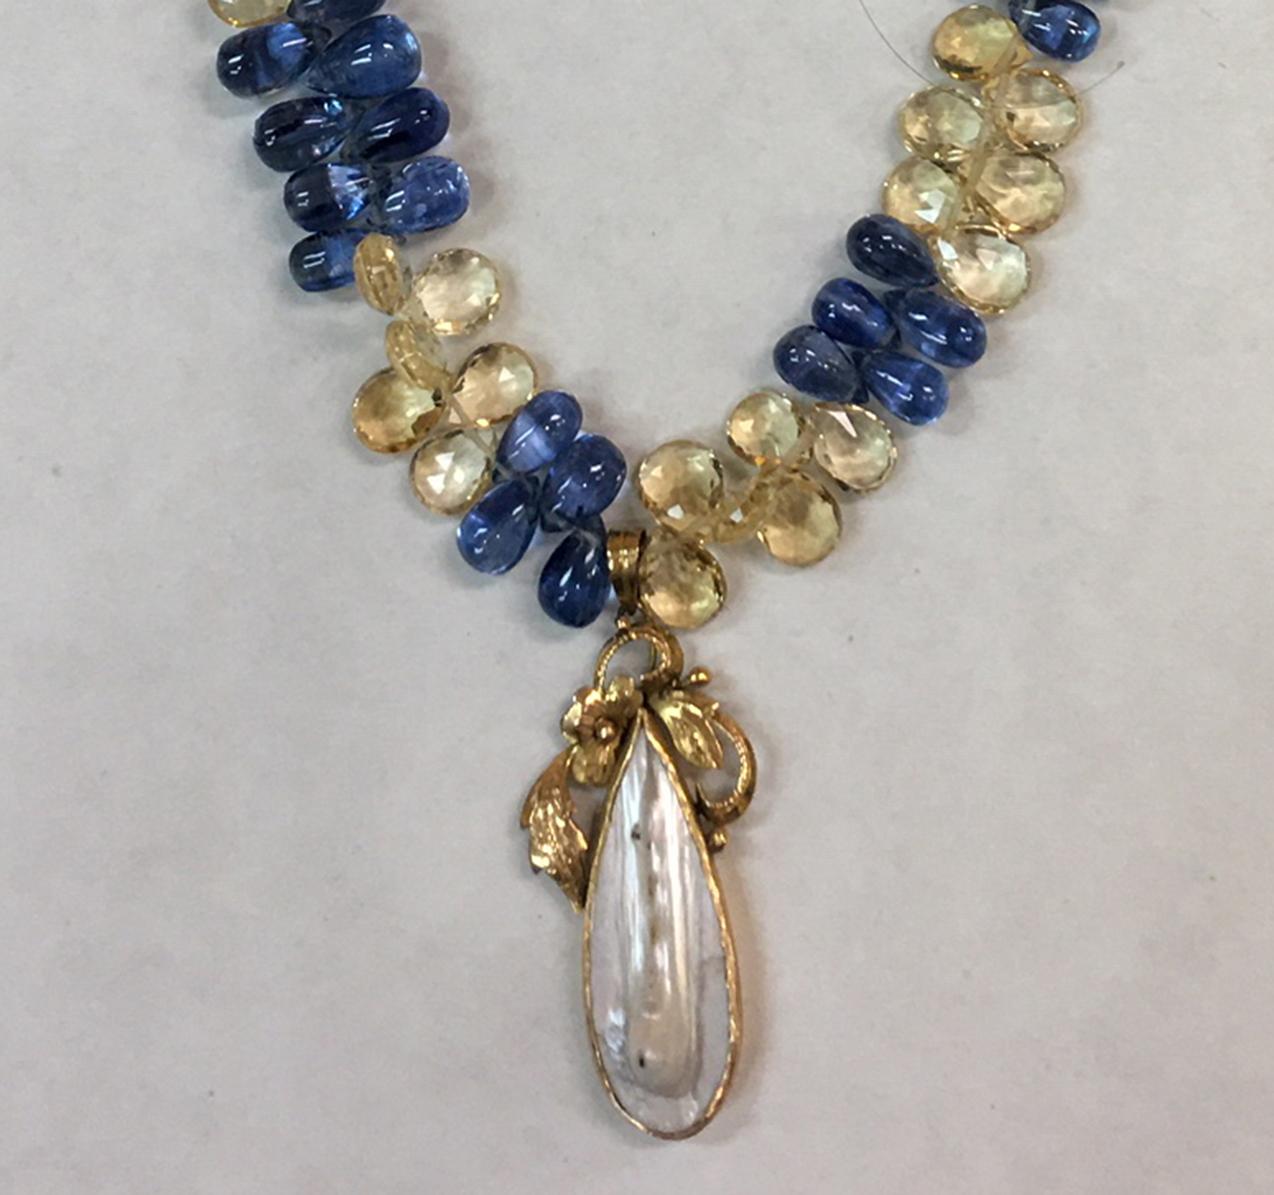 Fabulous Art Nouveau Free-form Teardrop Pearl in 14k yellow gold handmade mounting of floral/foliage design accompanied by cabochon teardrop Pearl; necklace comprised of facet-cut citrine and sapphire briolettes, held by an 18k yellow gold clasp